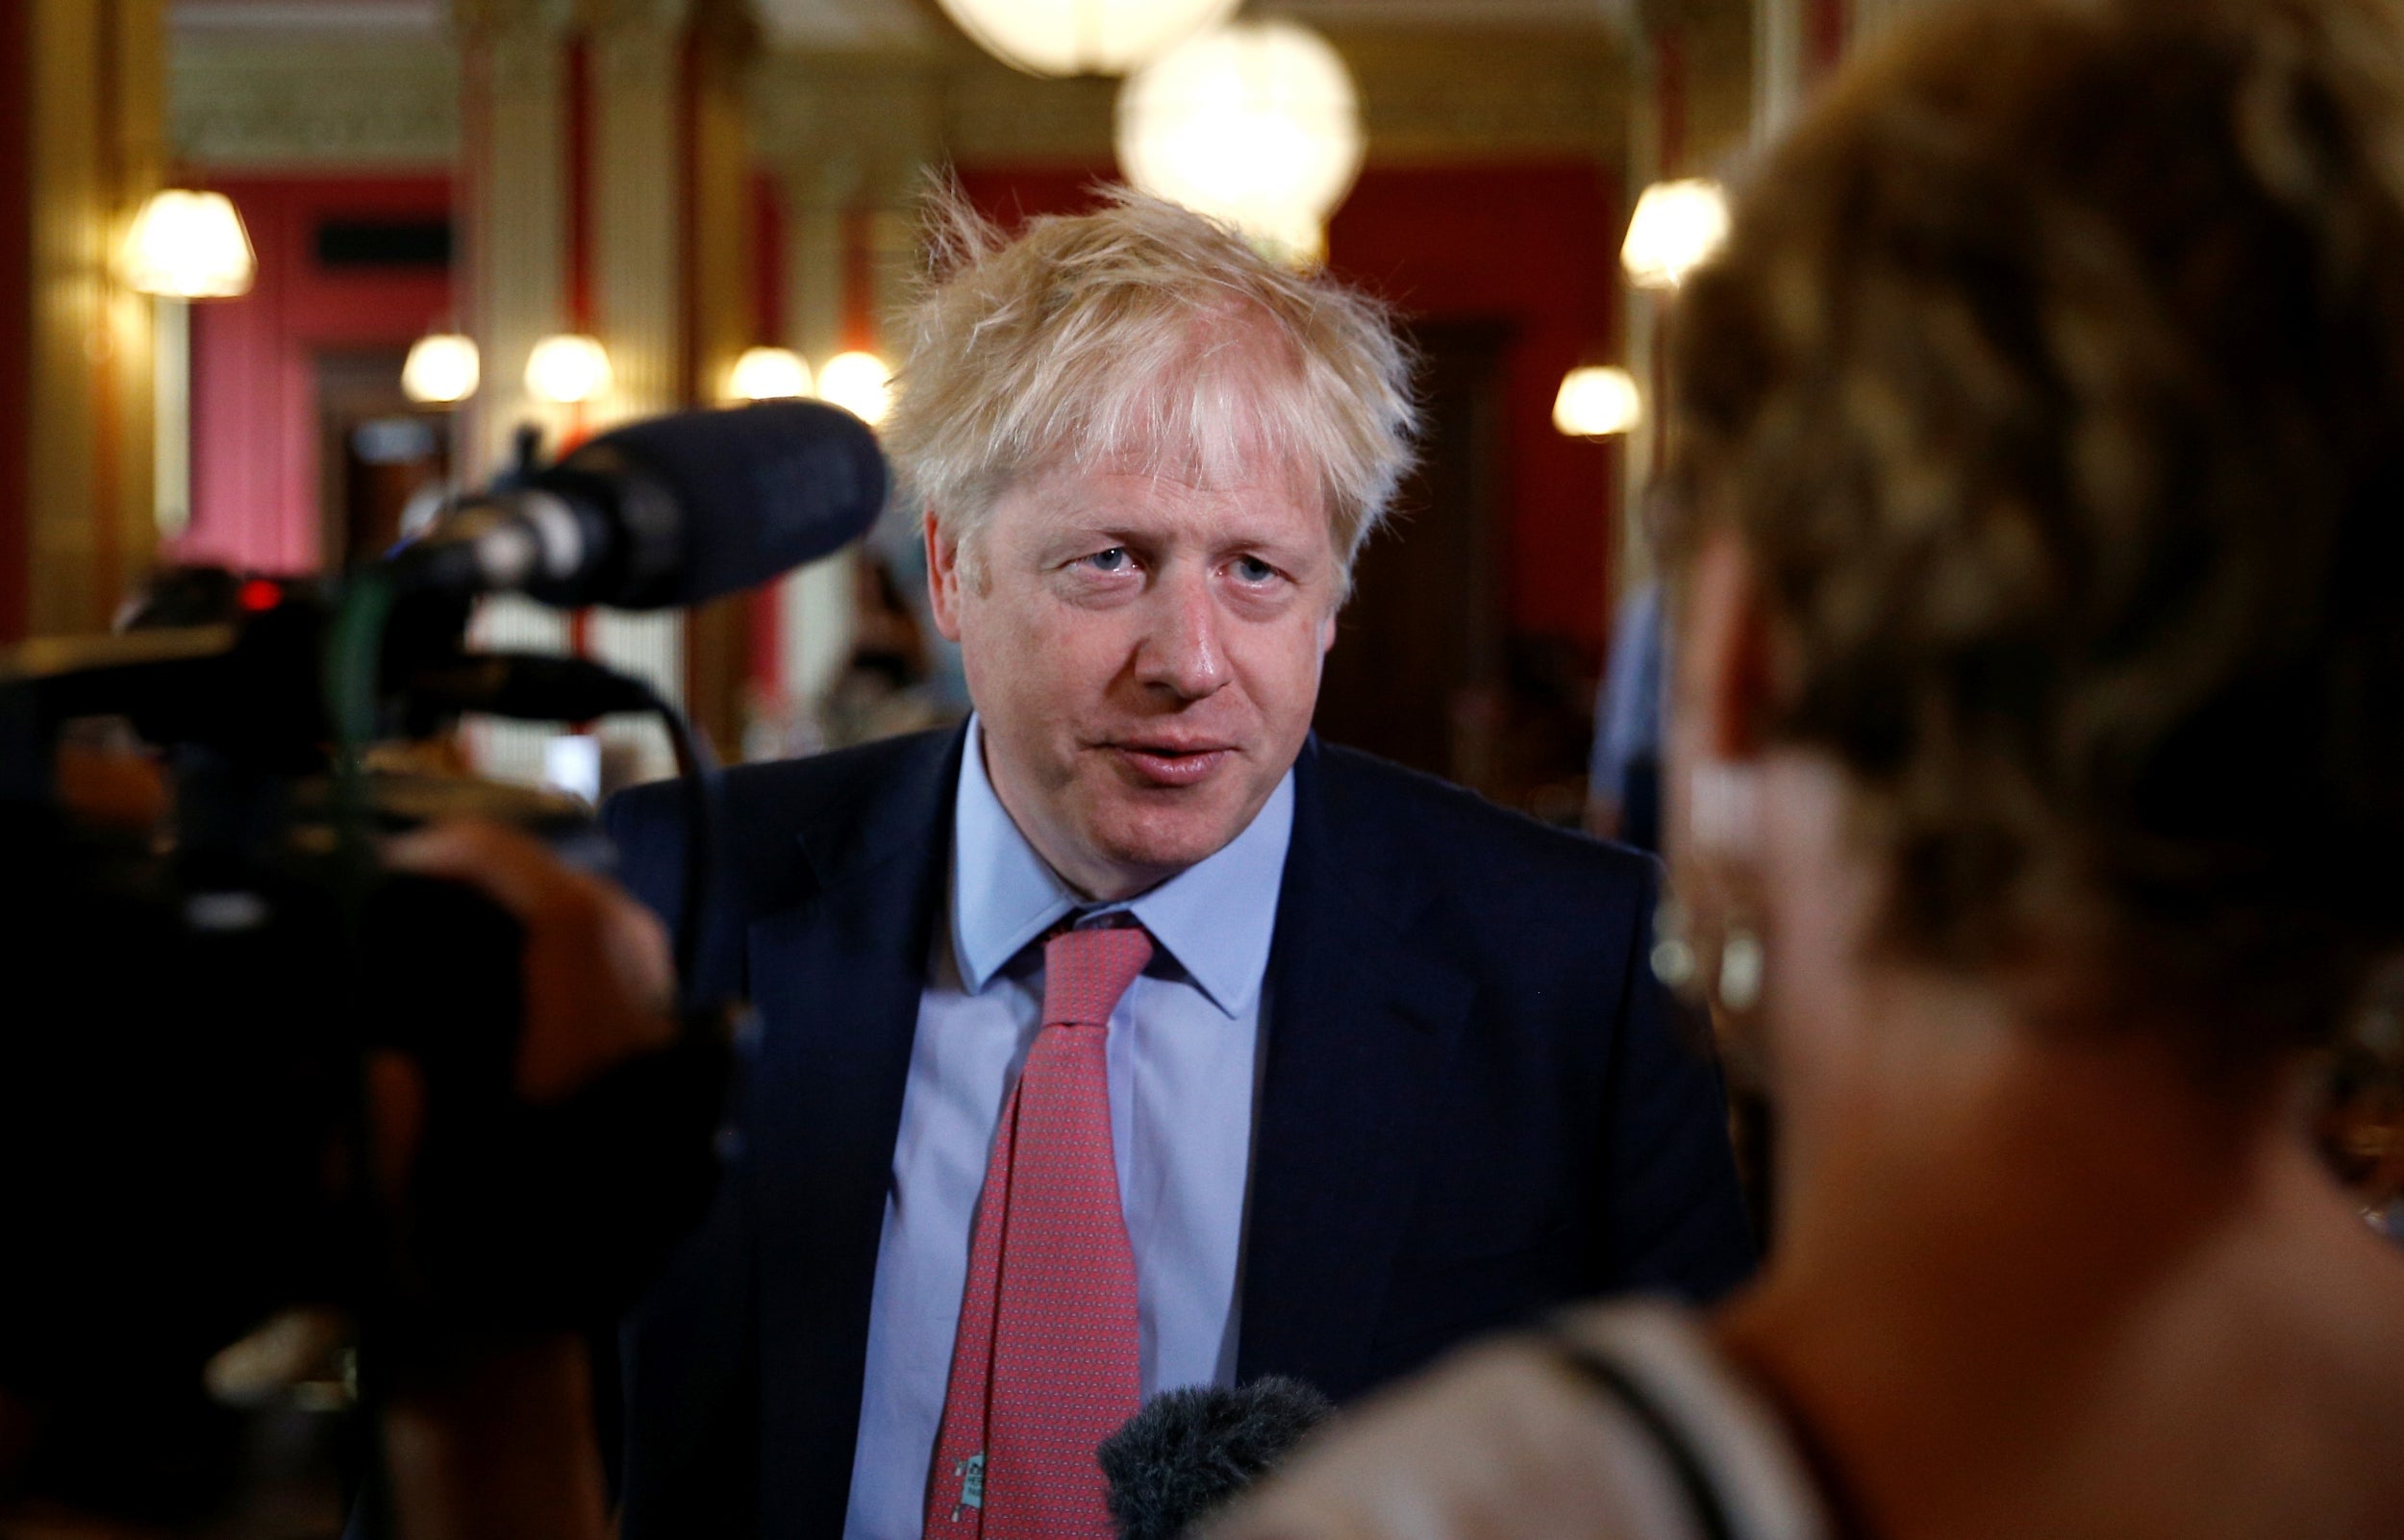 Johnson will want a free marketeer to vouch for the UK’s interests in the US